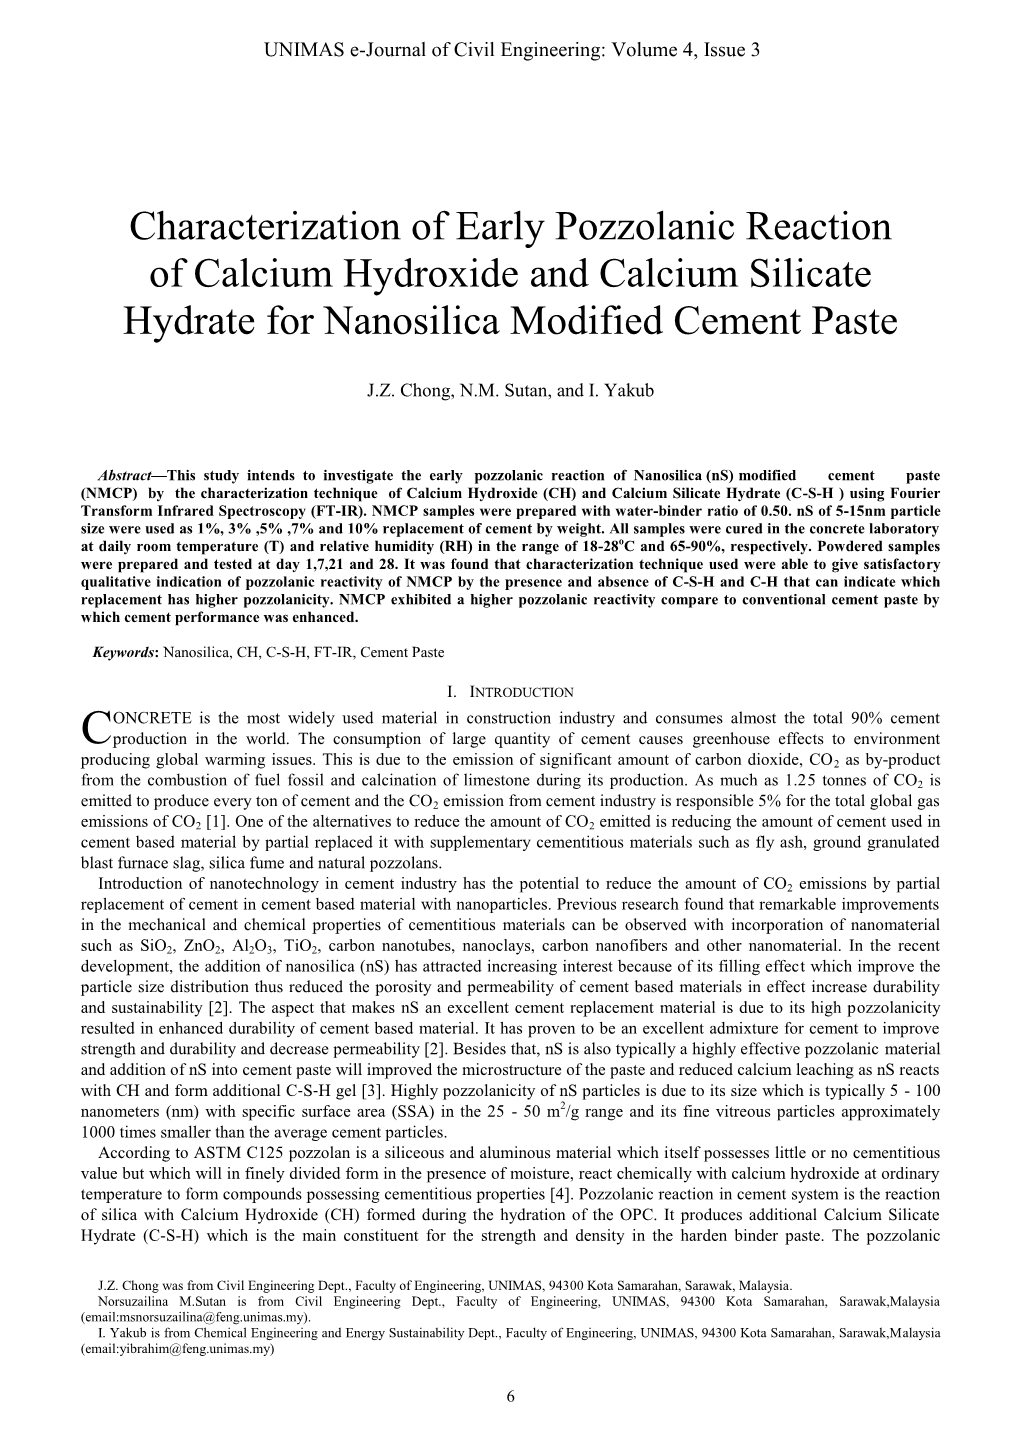 Characterization of Early Pozzolanic Reaction of Calcium Hydroxide and Calcium Silicate Hydrate for Nanosilica Modified Cement Paste